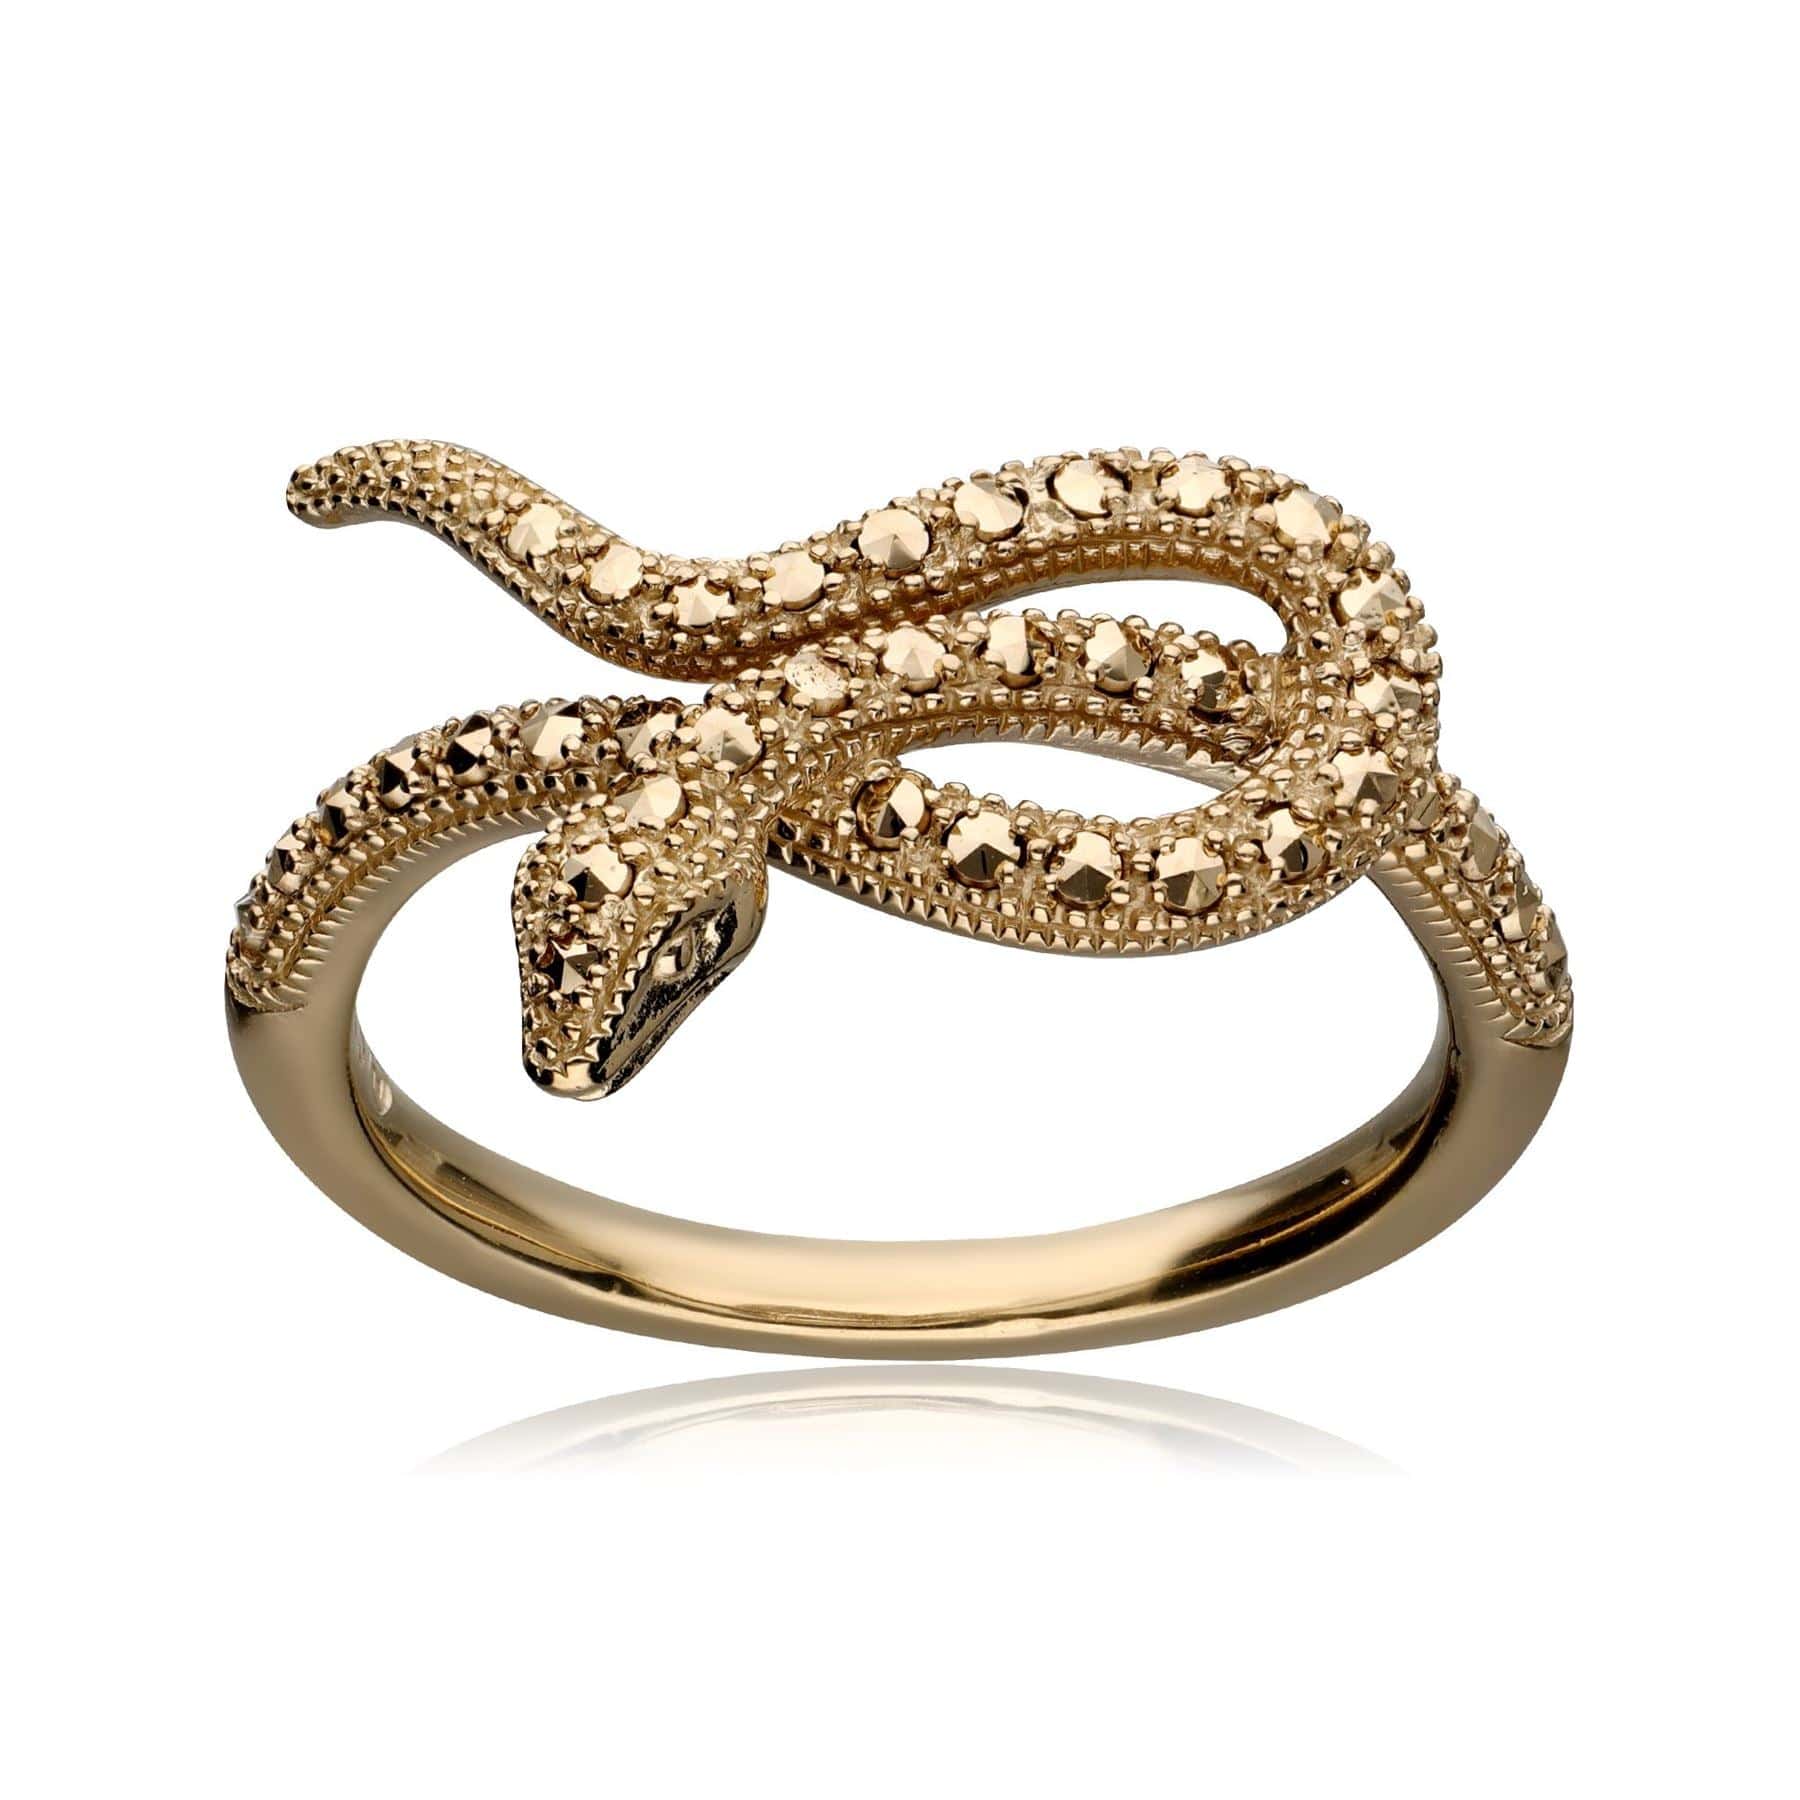 Art Nouveau Marcasite Winding Snake Ring in 18ct Gold Plated Silver - Gemondo